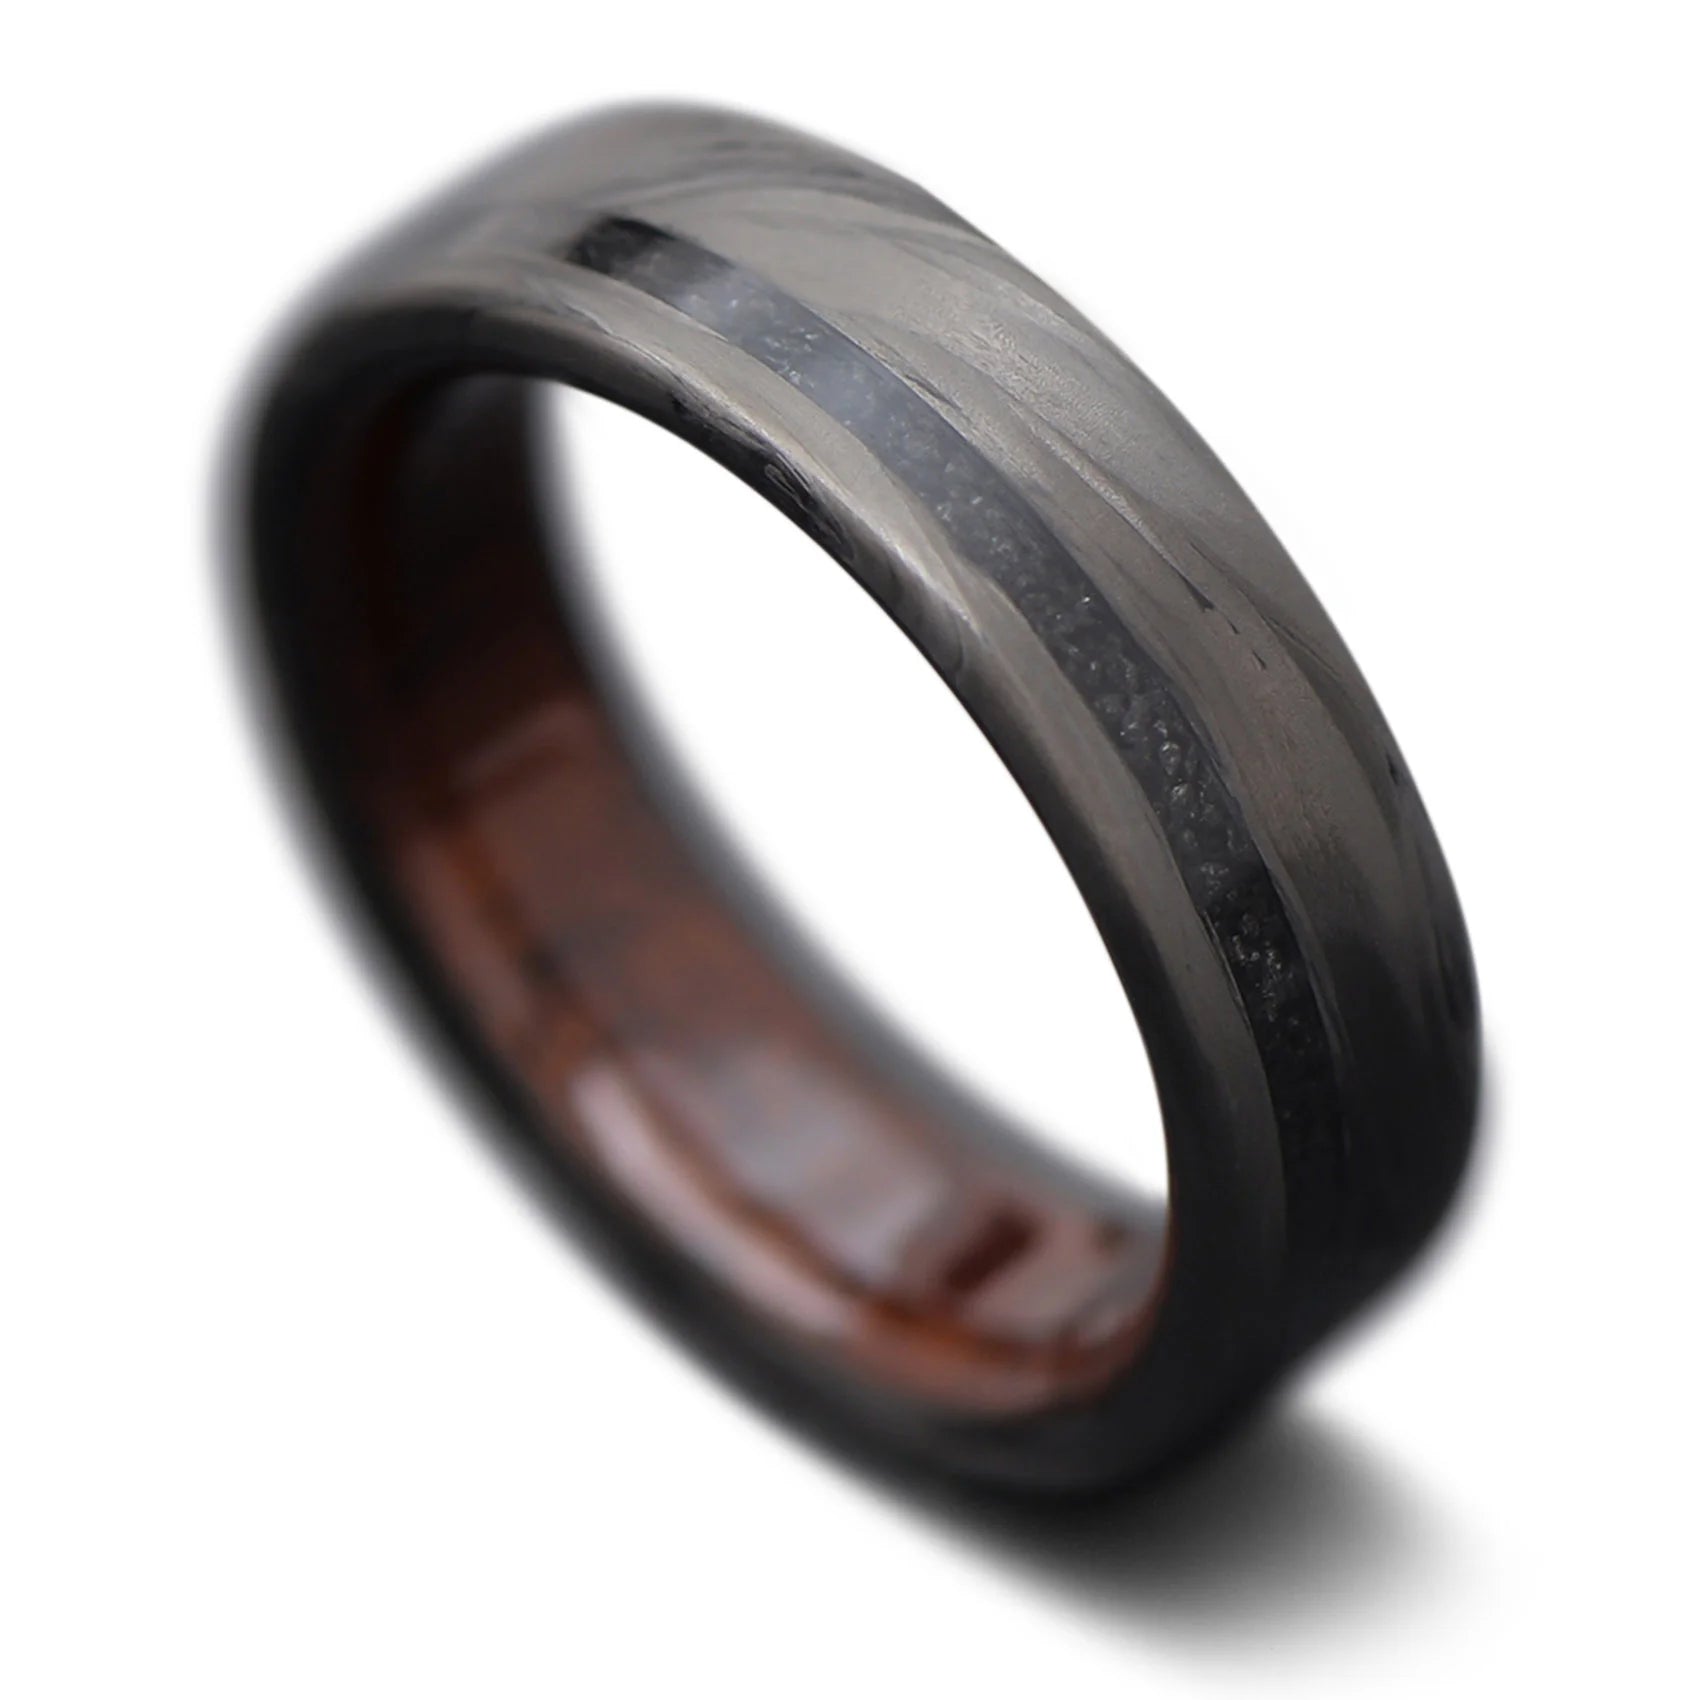 Carbon fiber wedding ring with black Onyx inlay and Walnut inner sleeve, 6mm -THE HORIZON